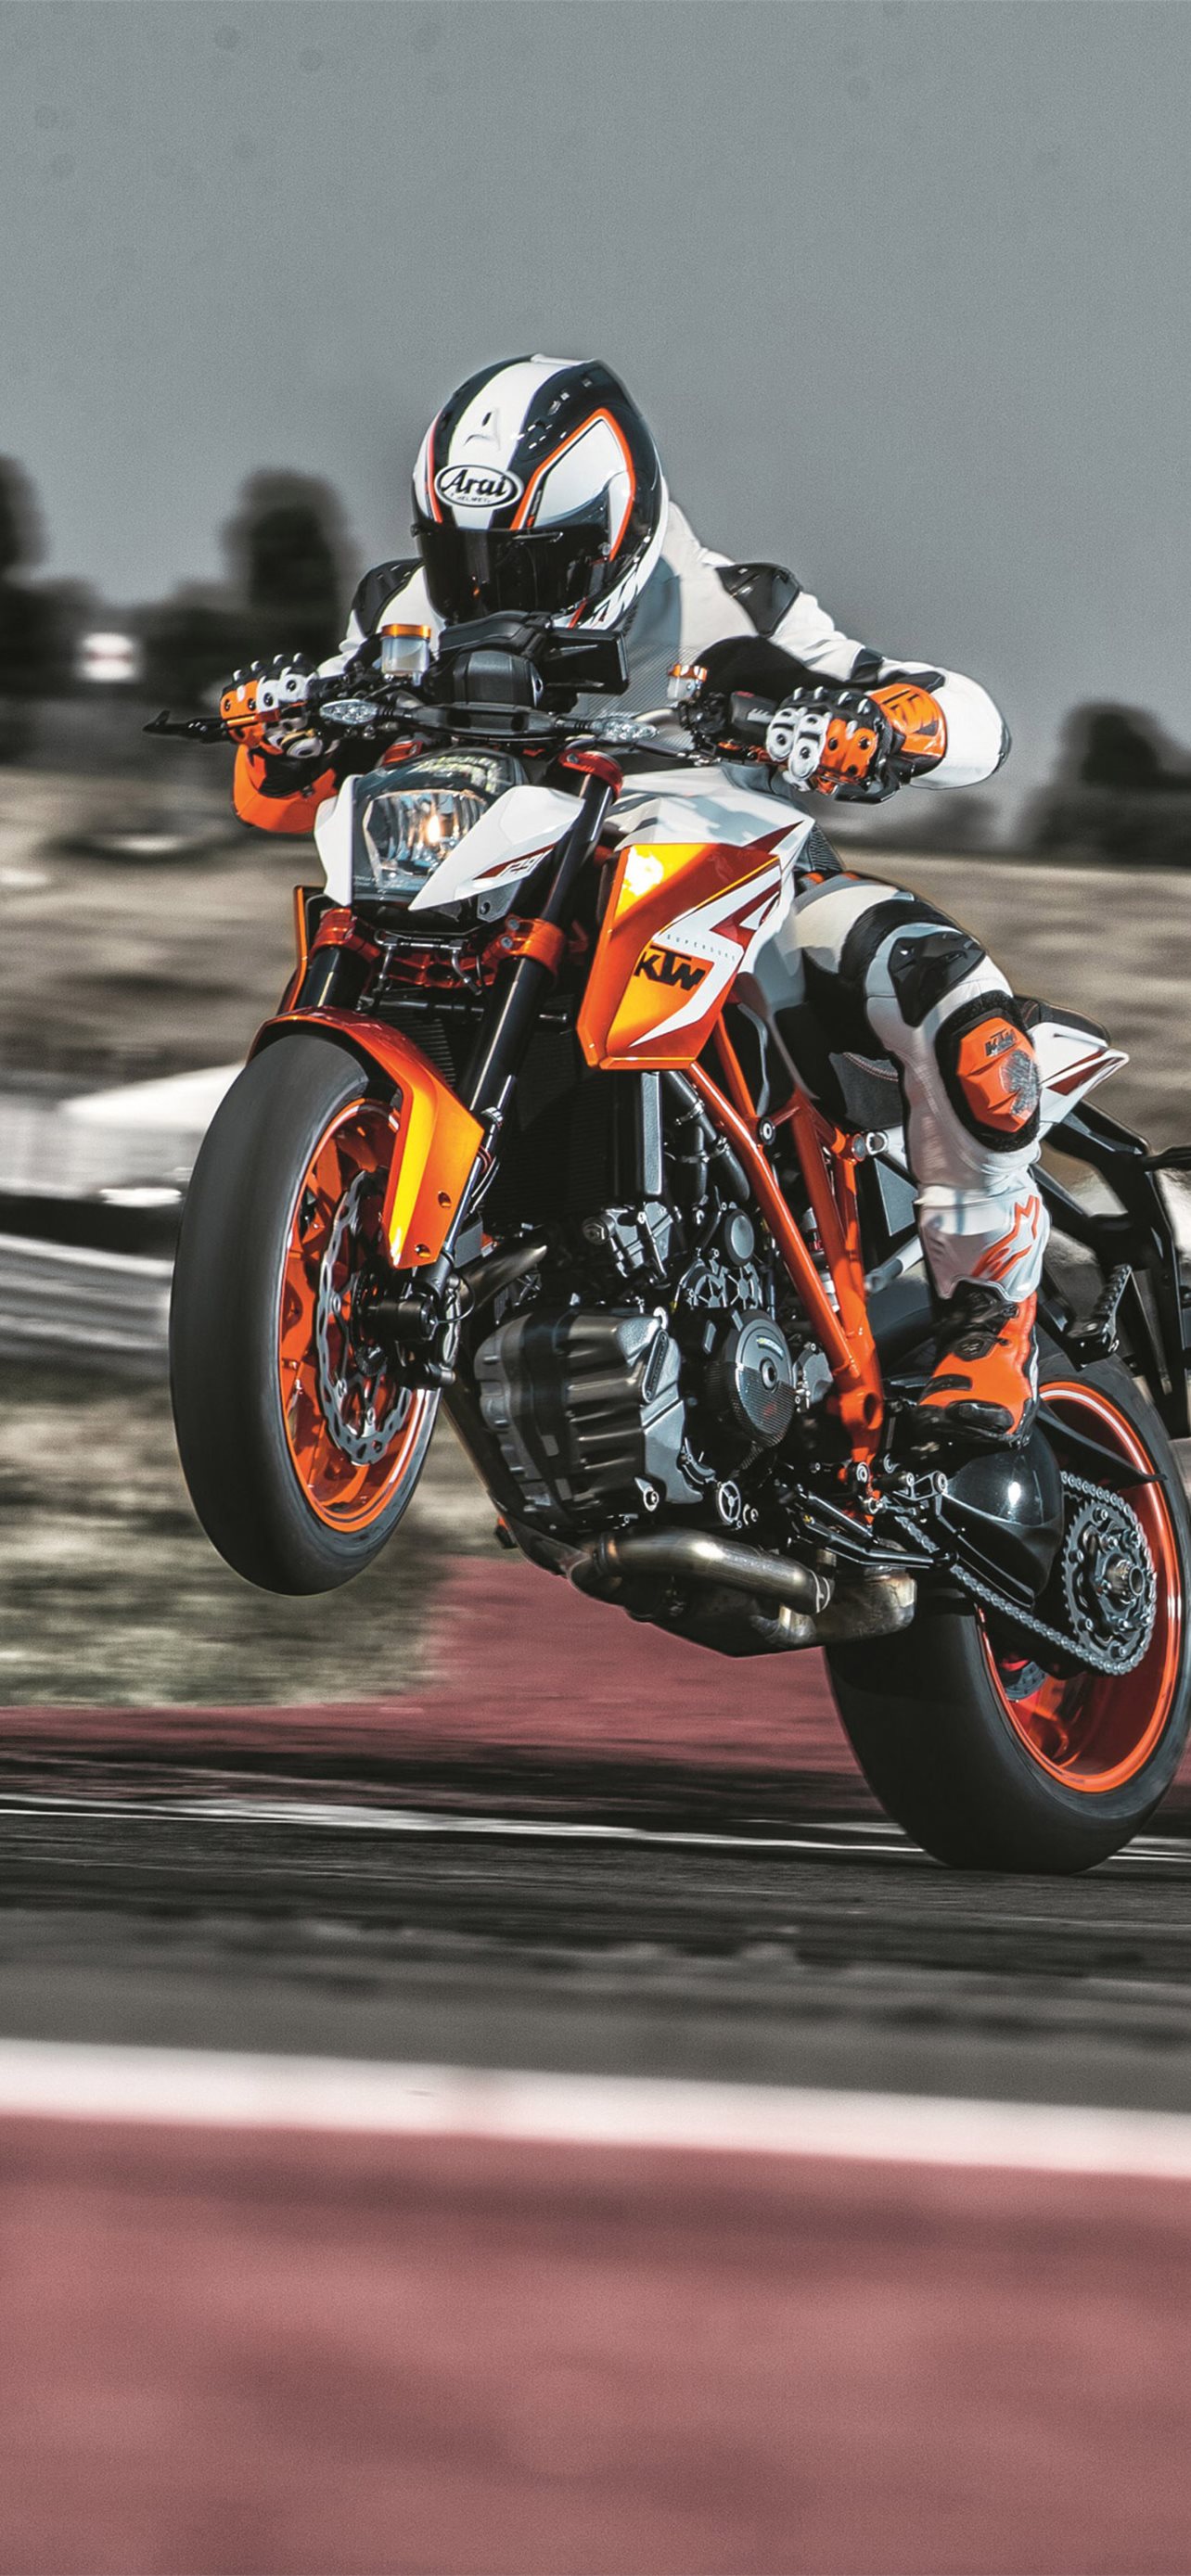 KTM Super Duke Samsung Galaxy Note 9 8 S9 S8 S8 QH... iPhone Wallpapers  Free Download